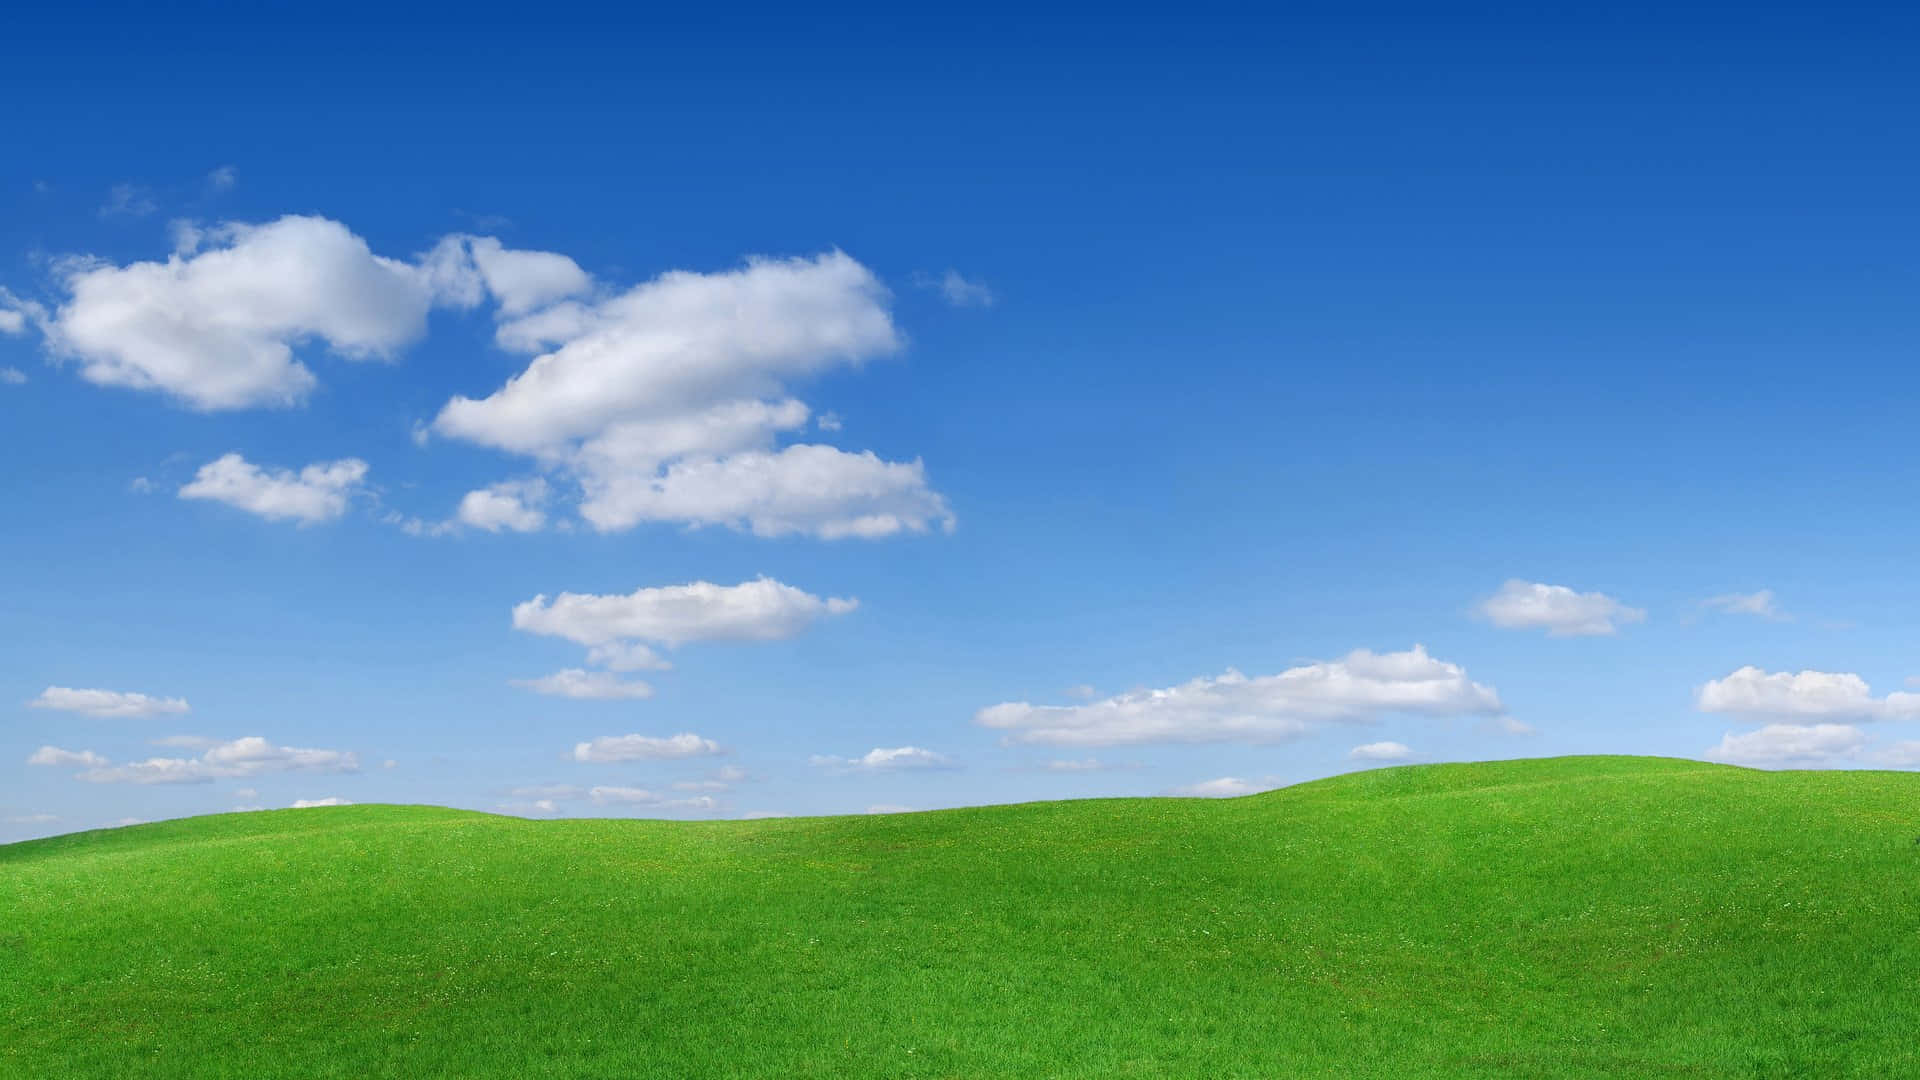 Grass And Sky Mountain Landscape Background